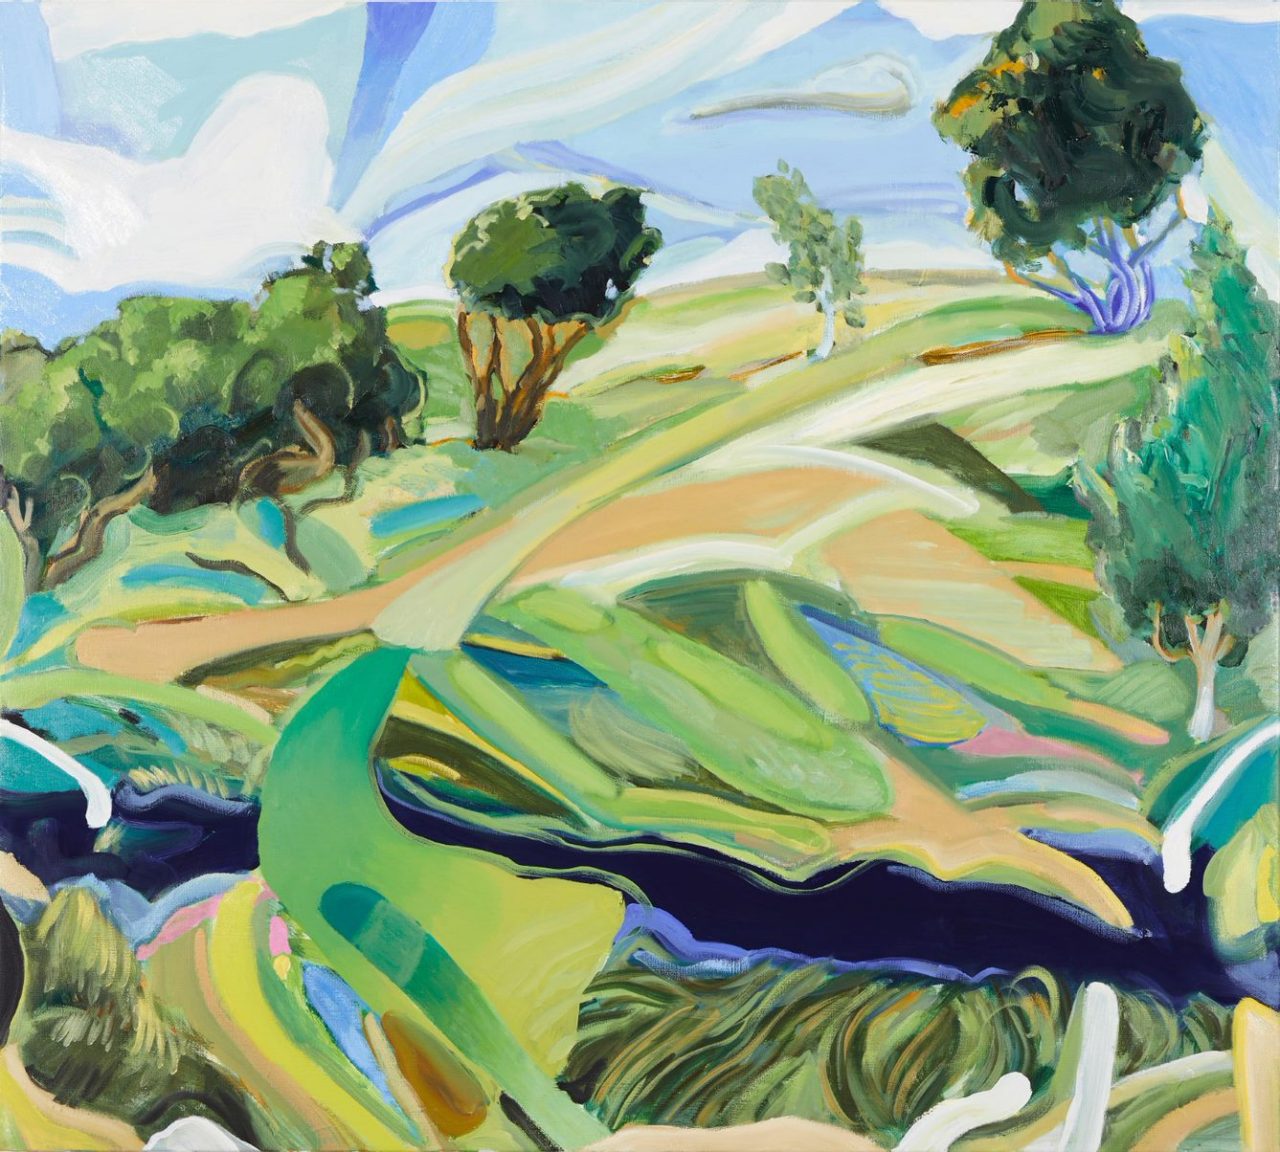 Image source: Myles Young, Shortcut to Widefield, 2020  Macquarie Group Collection © the artist